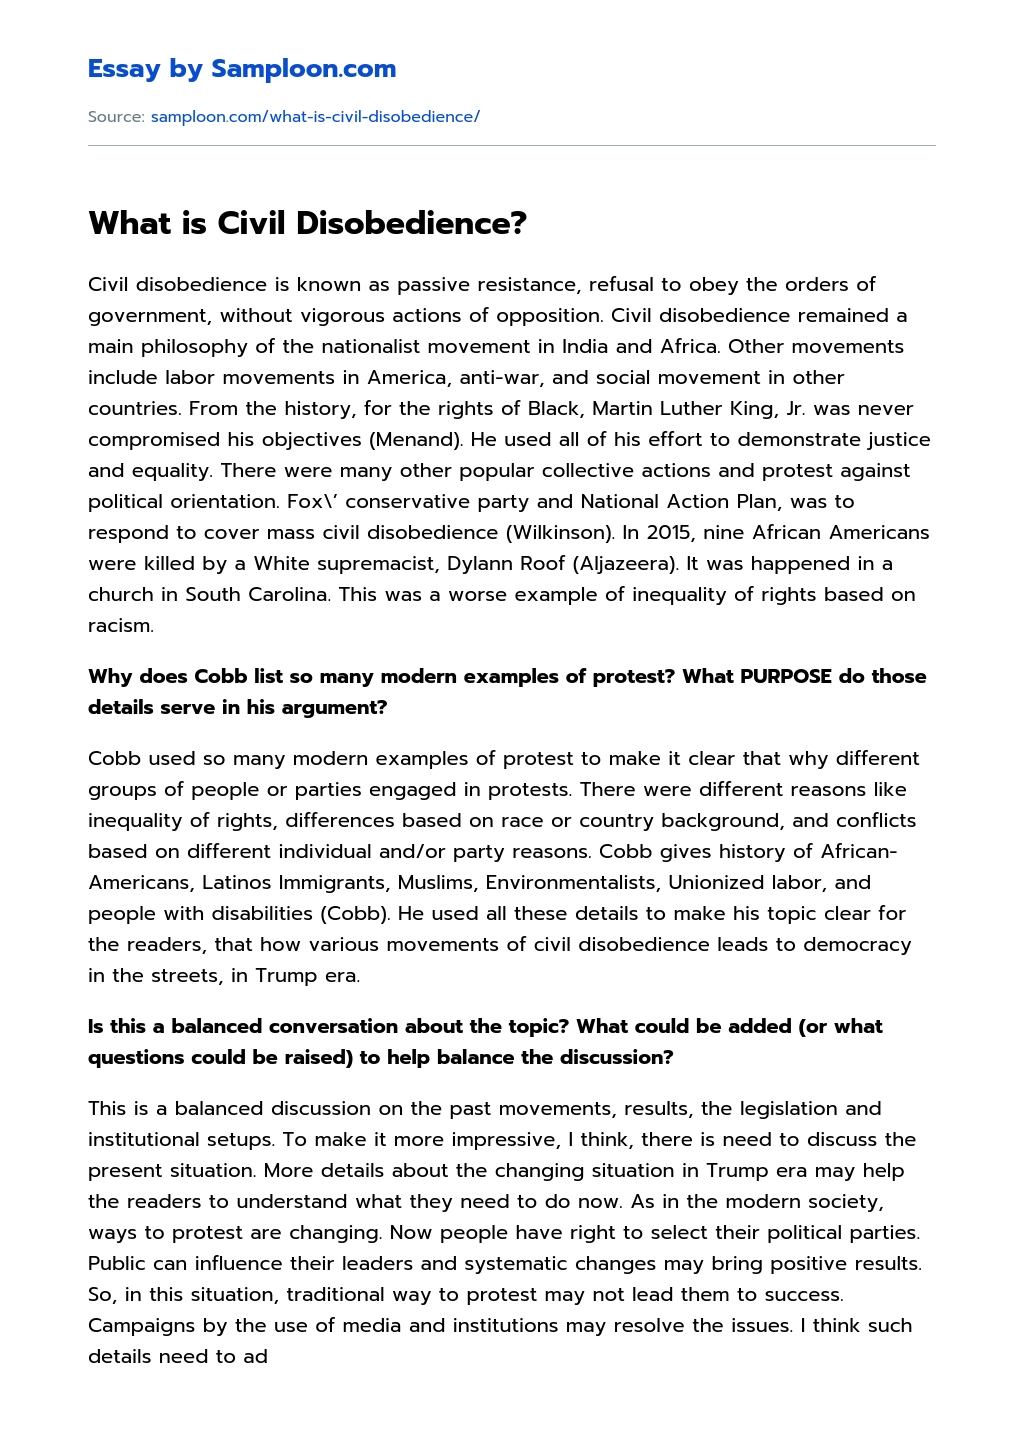 What is Civil Disobedience? essay